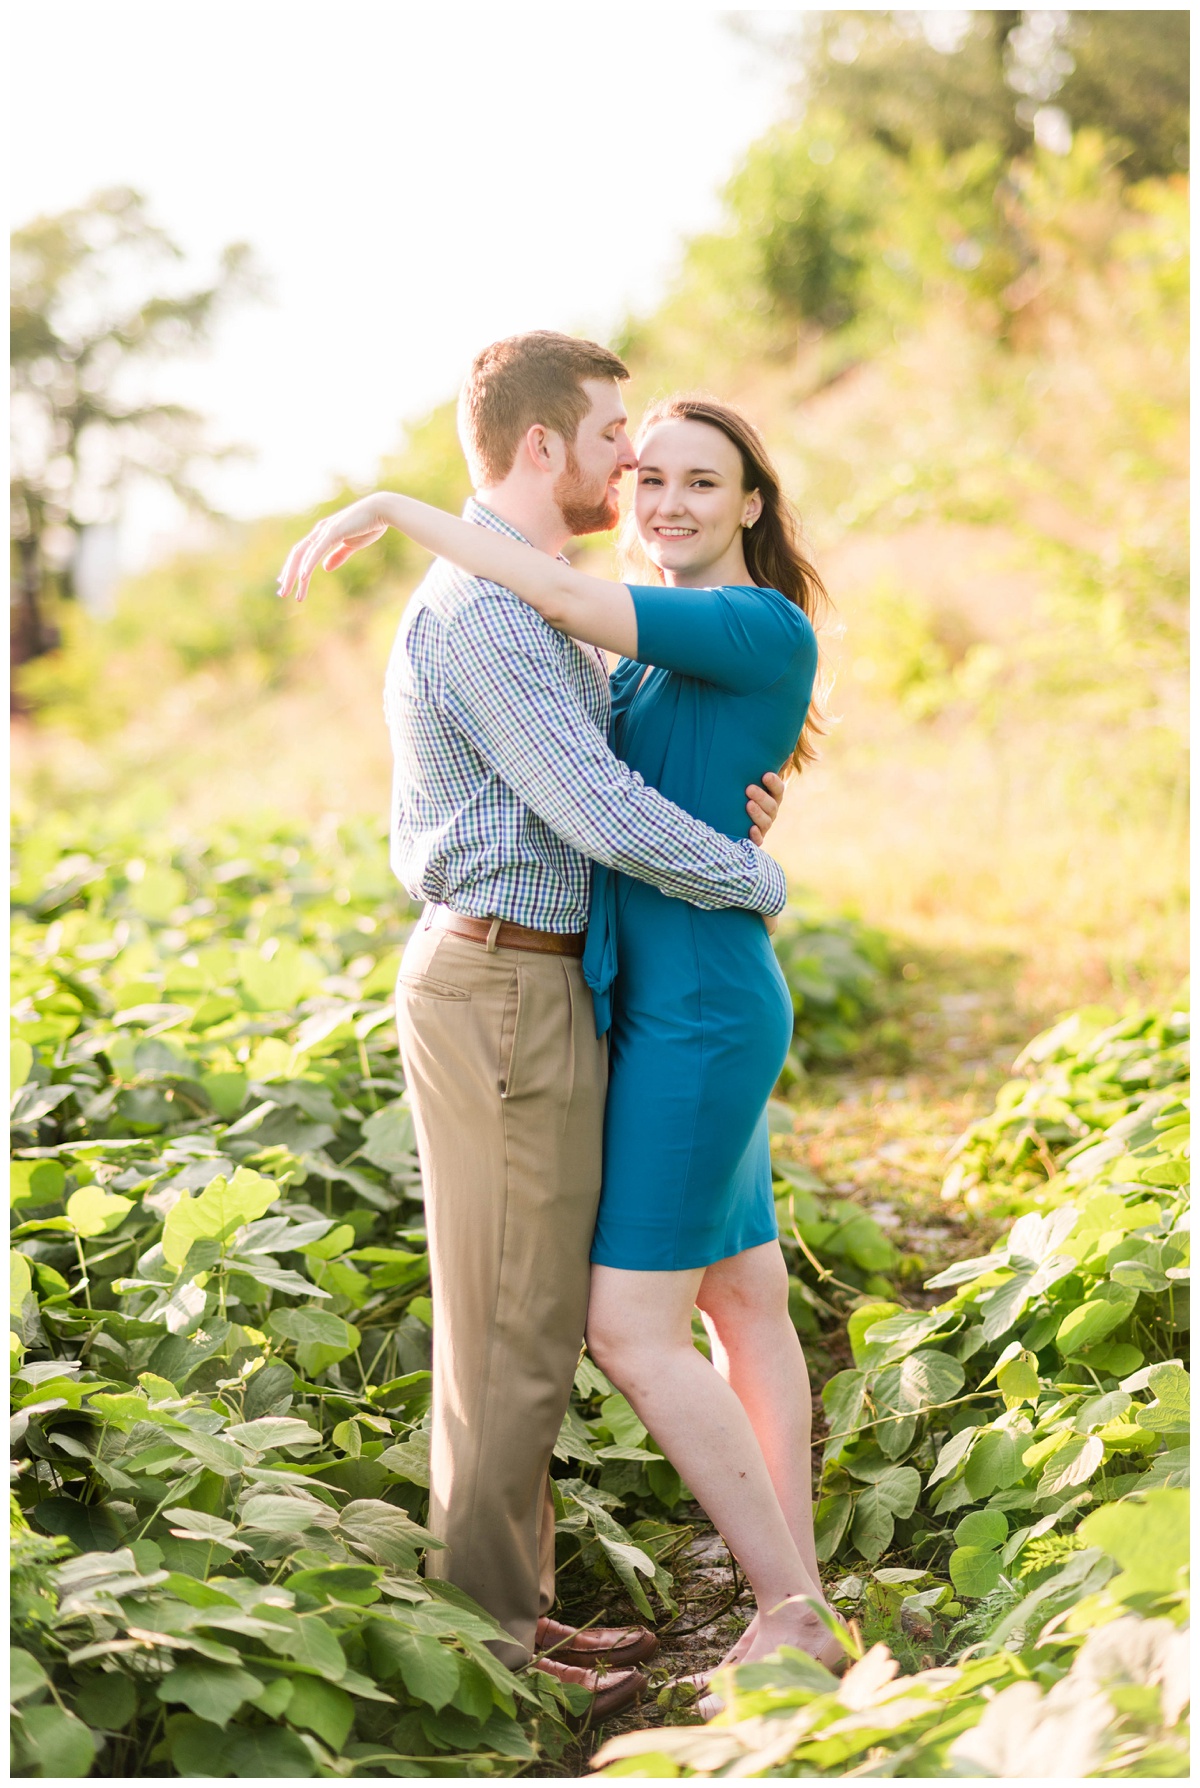 engagement photos with grace and reid at libby hill park in the spring time in richmond